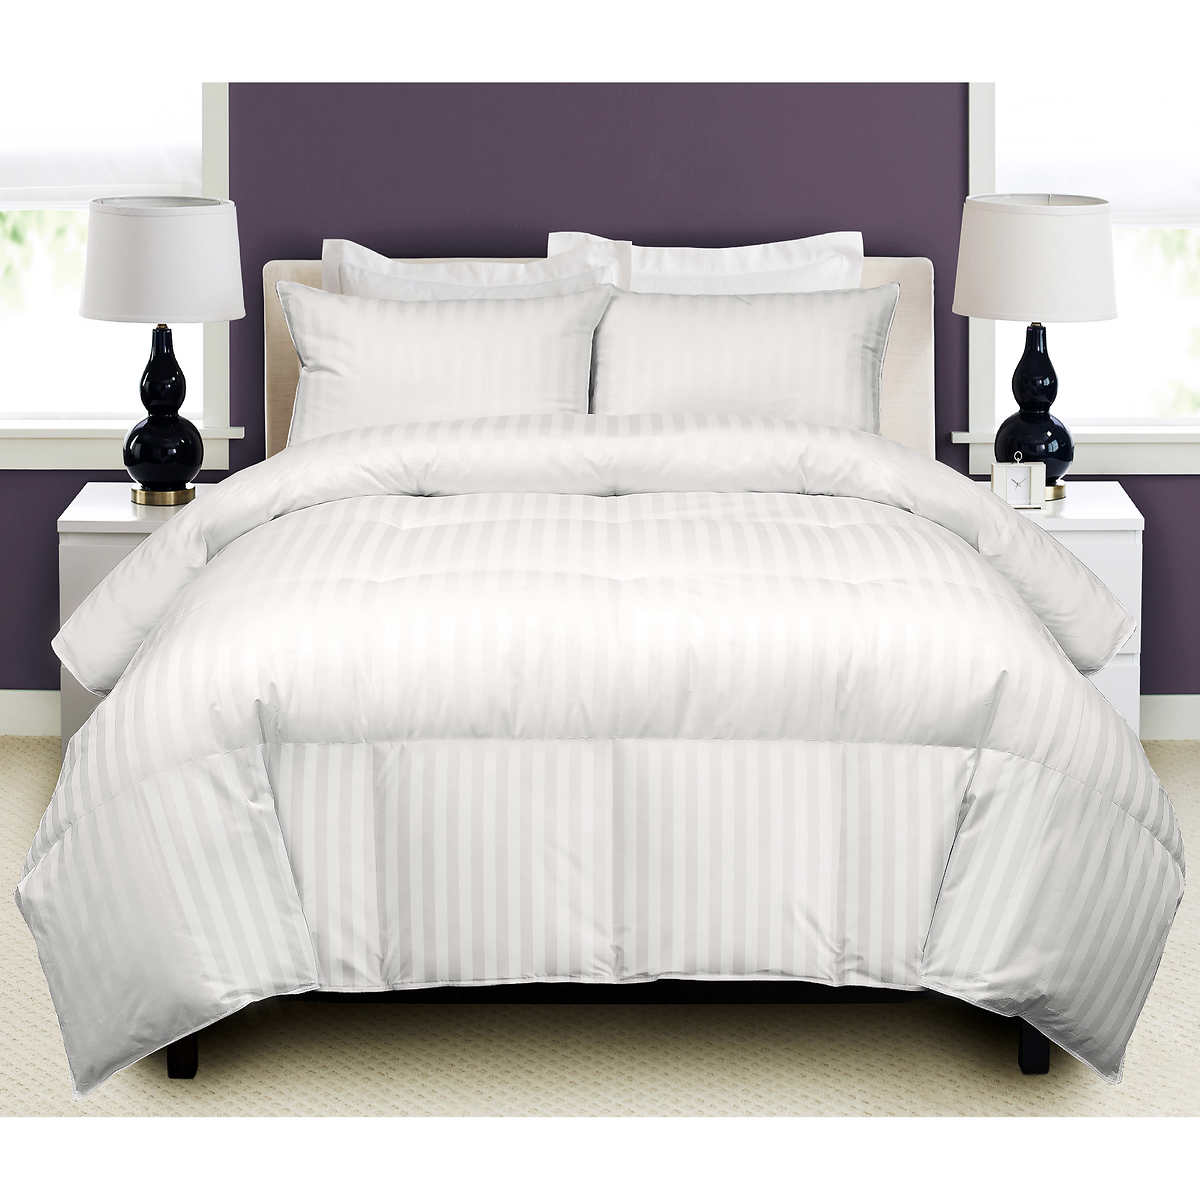 Hotel Grand White Goose Down Comforter, How To Keep A Down Comforter In A Duvet Cover